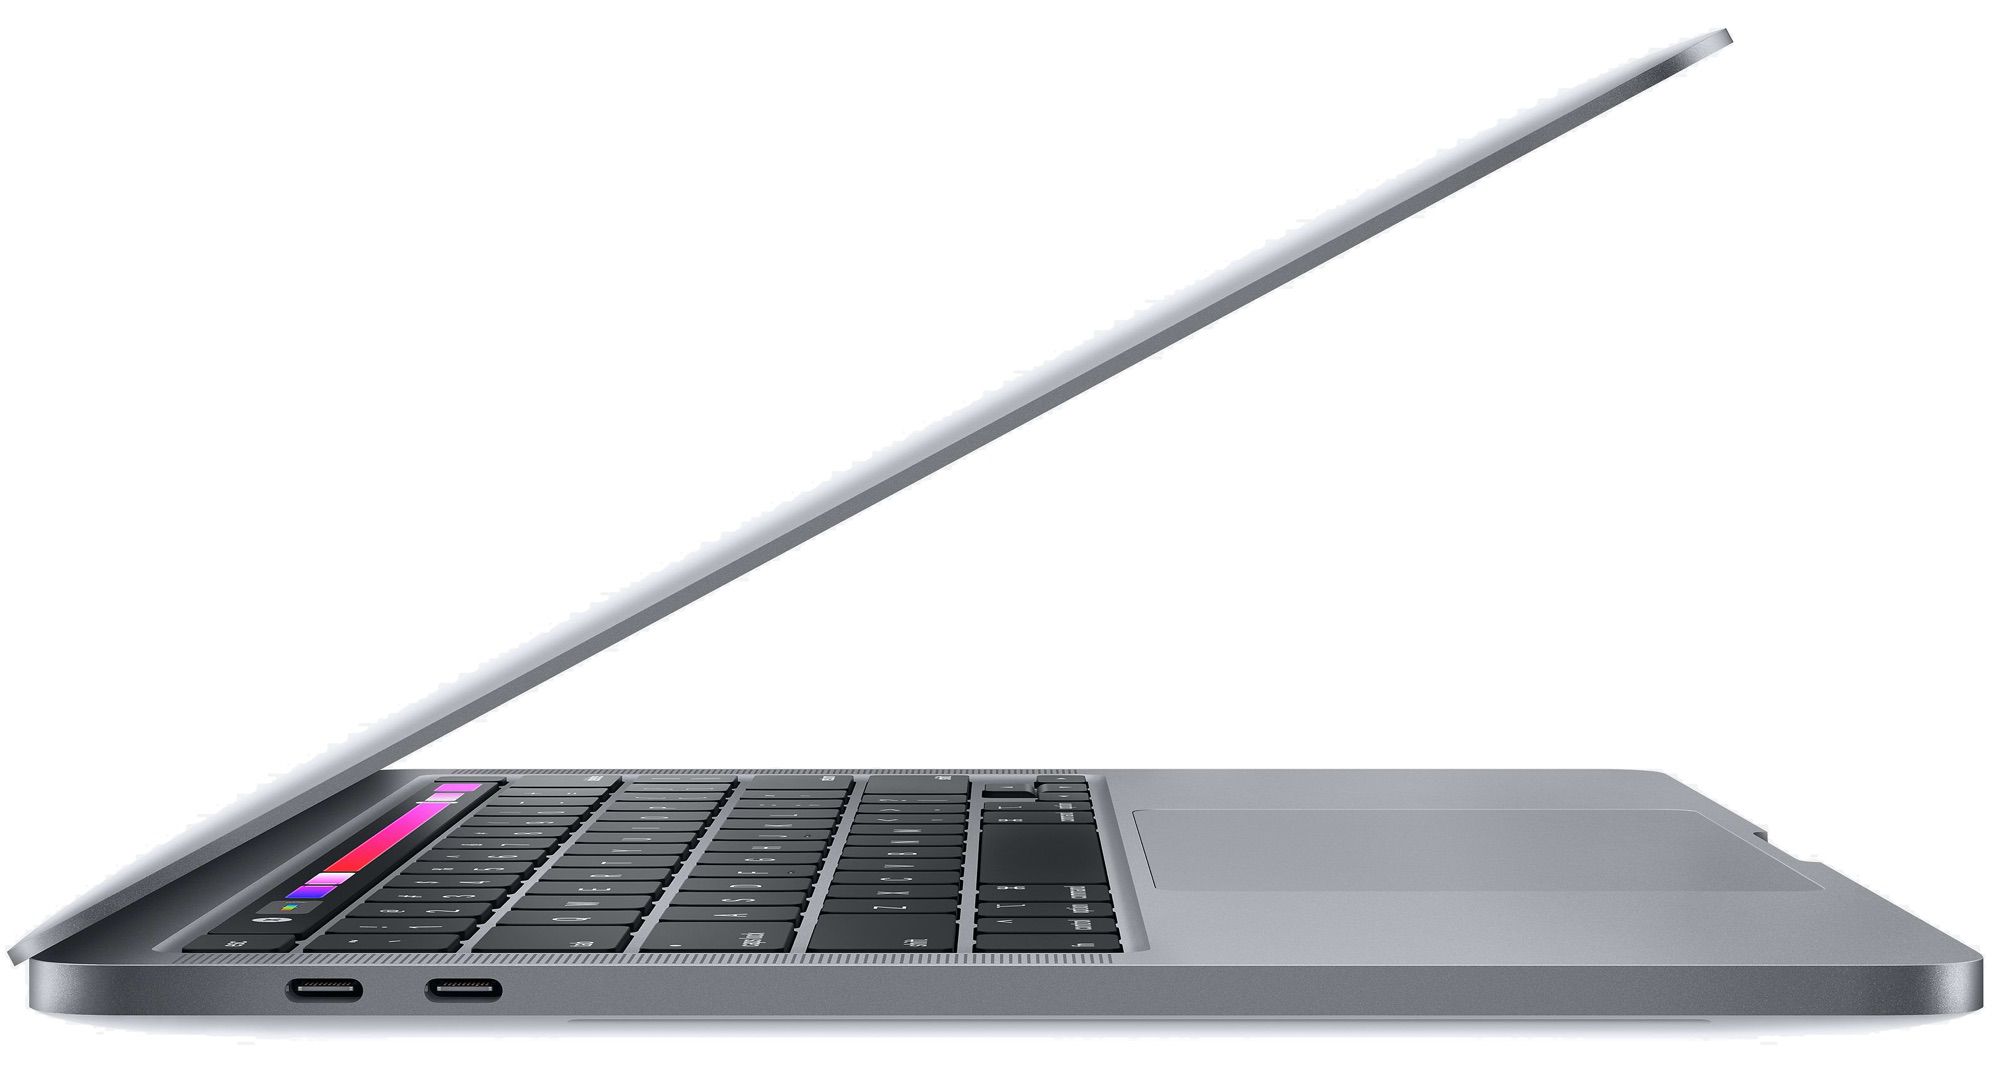 Macbook Pro 13 2021 Macbook Pro 13 Apple M1 Chip And 20 Hour Battery